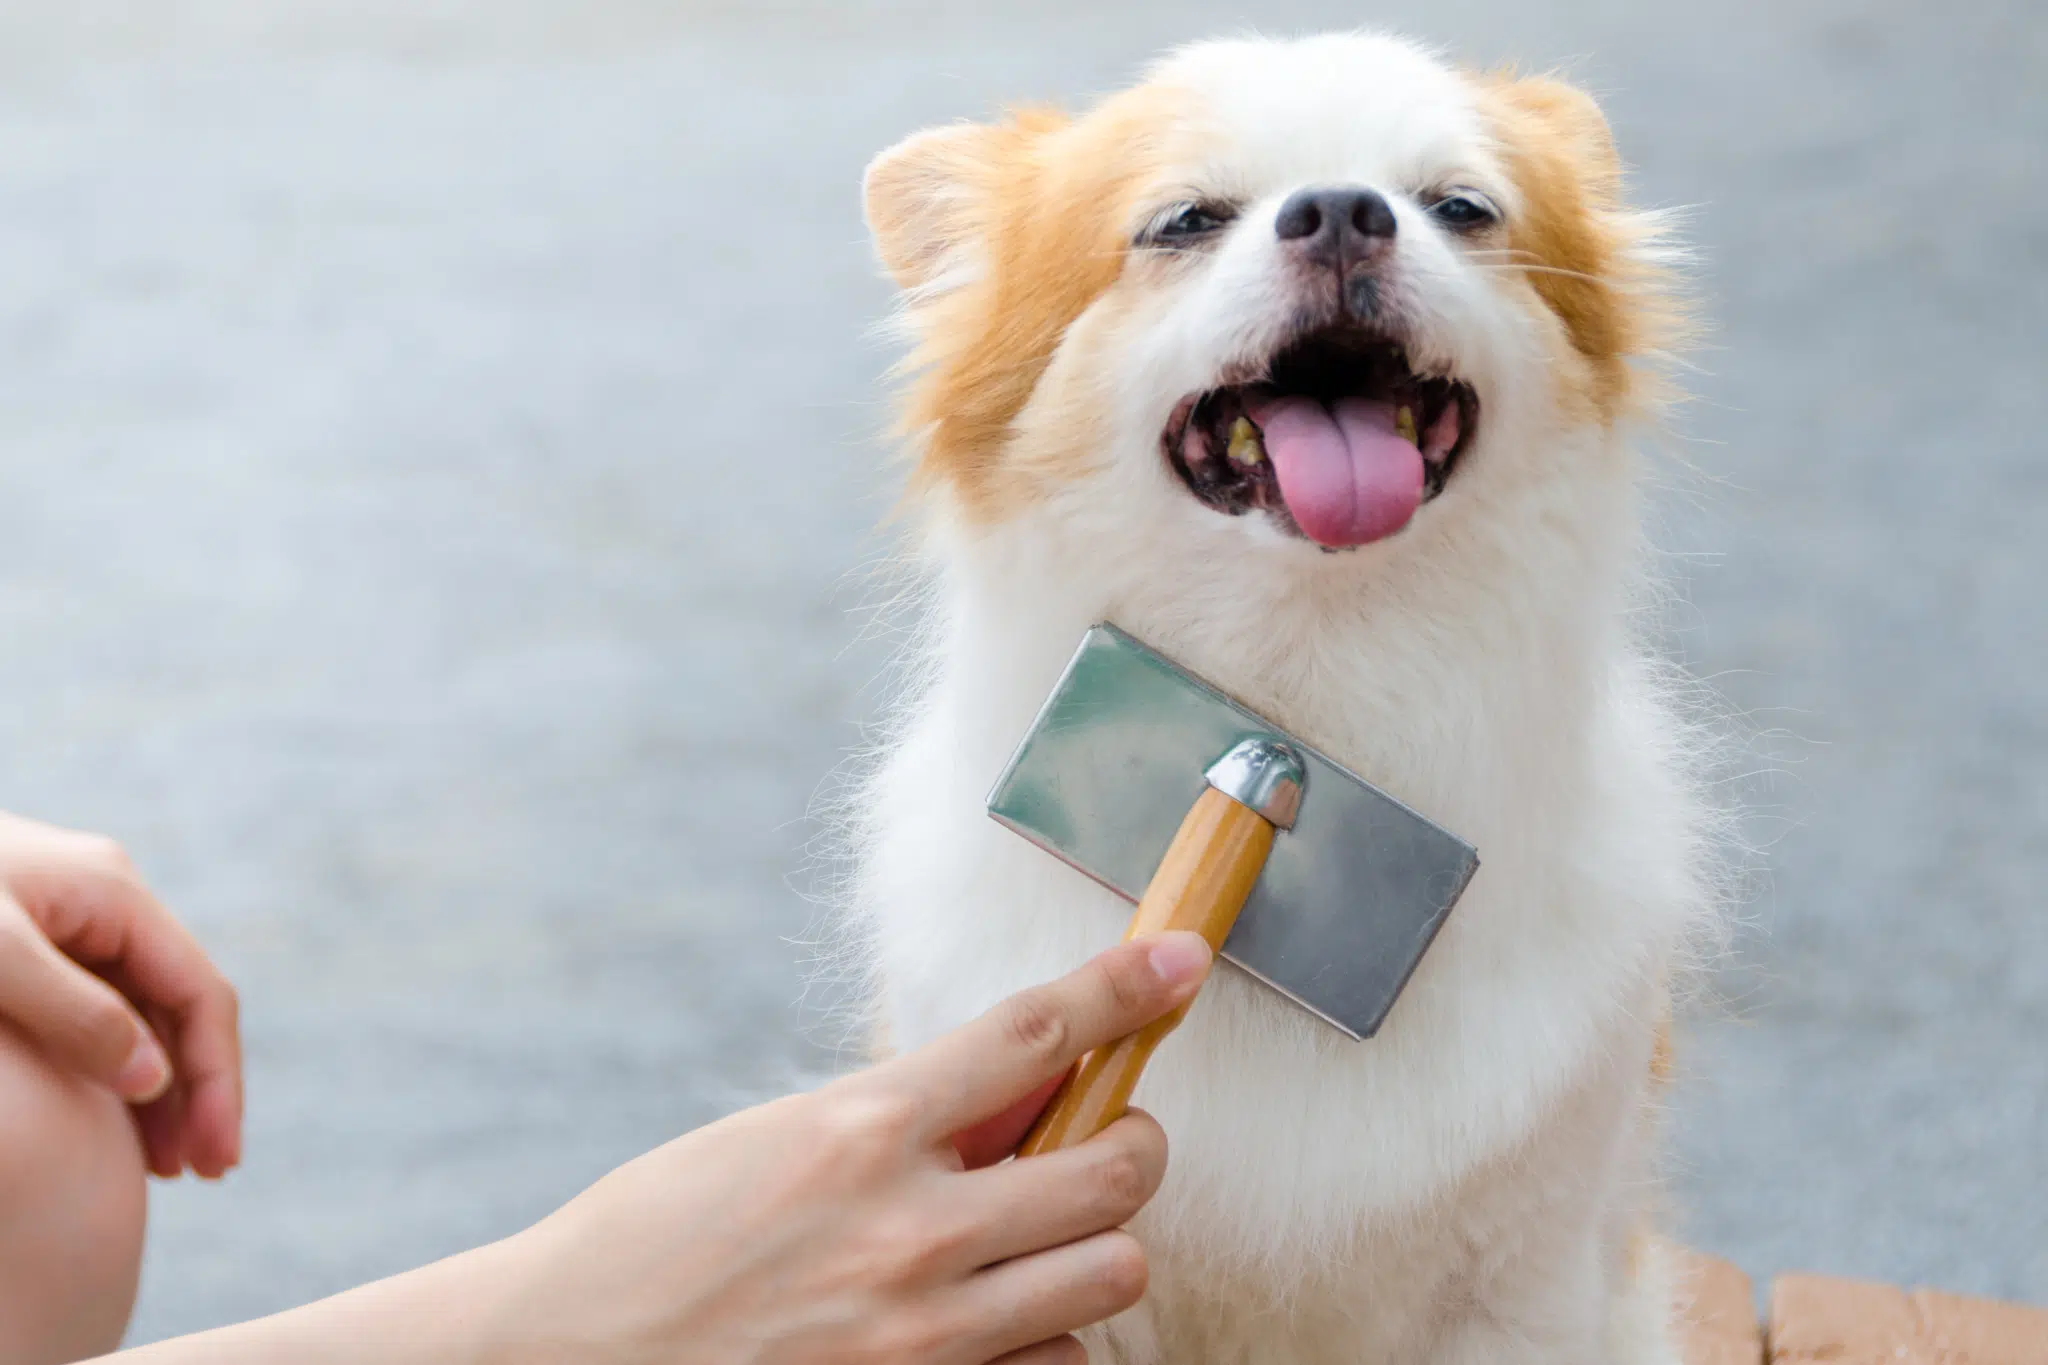 A dog smiling while being brushed